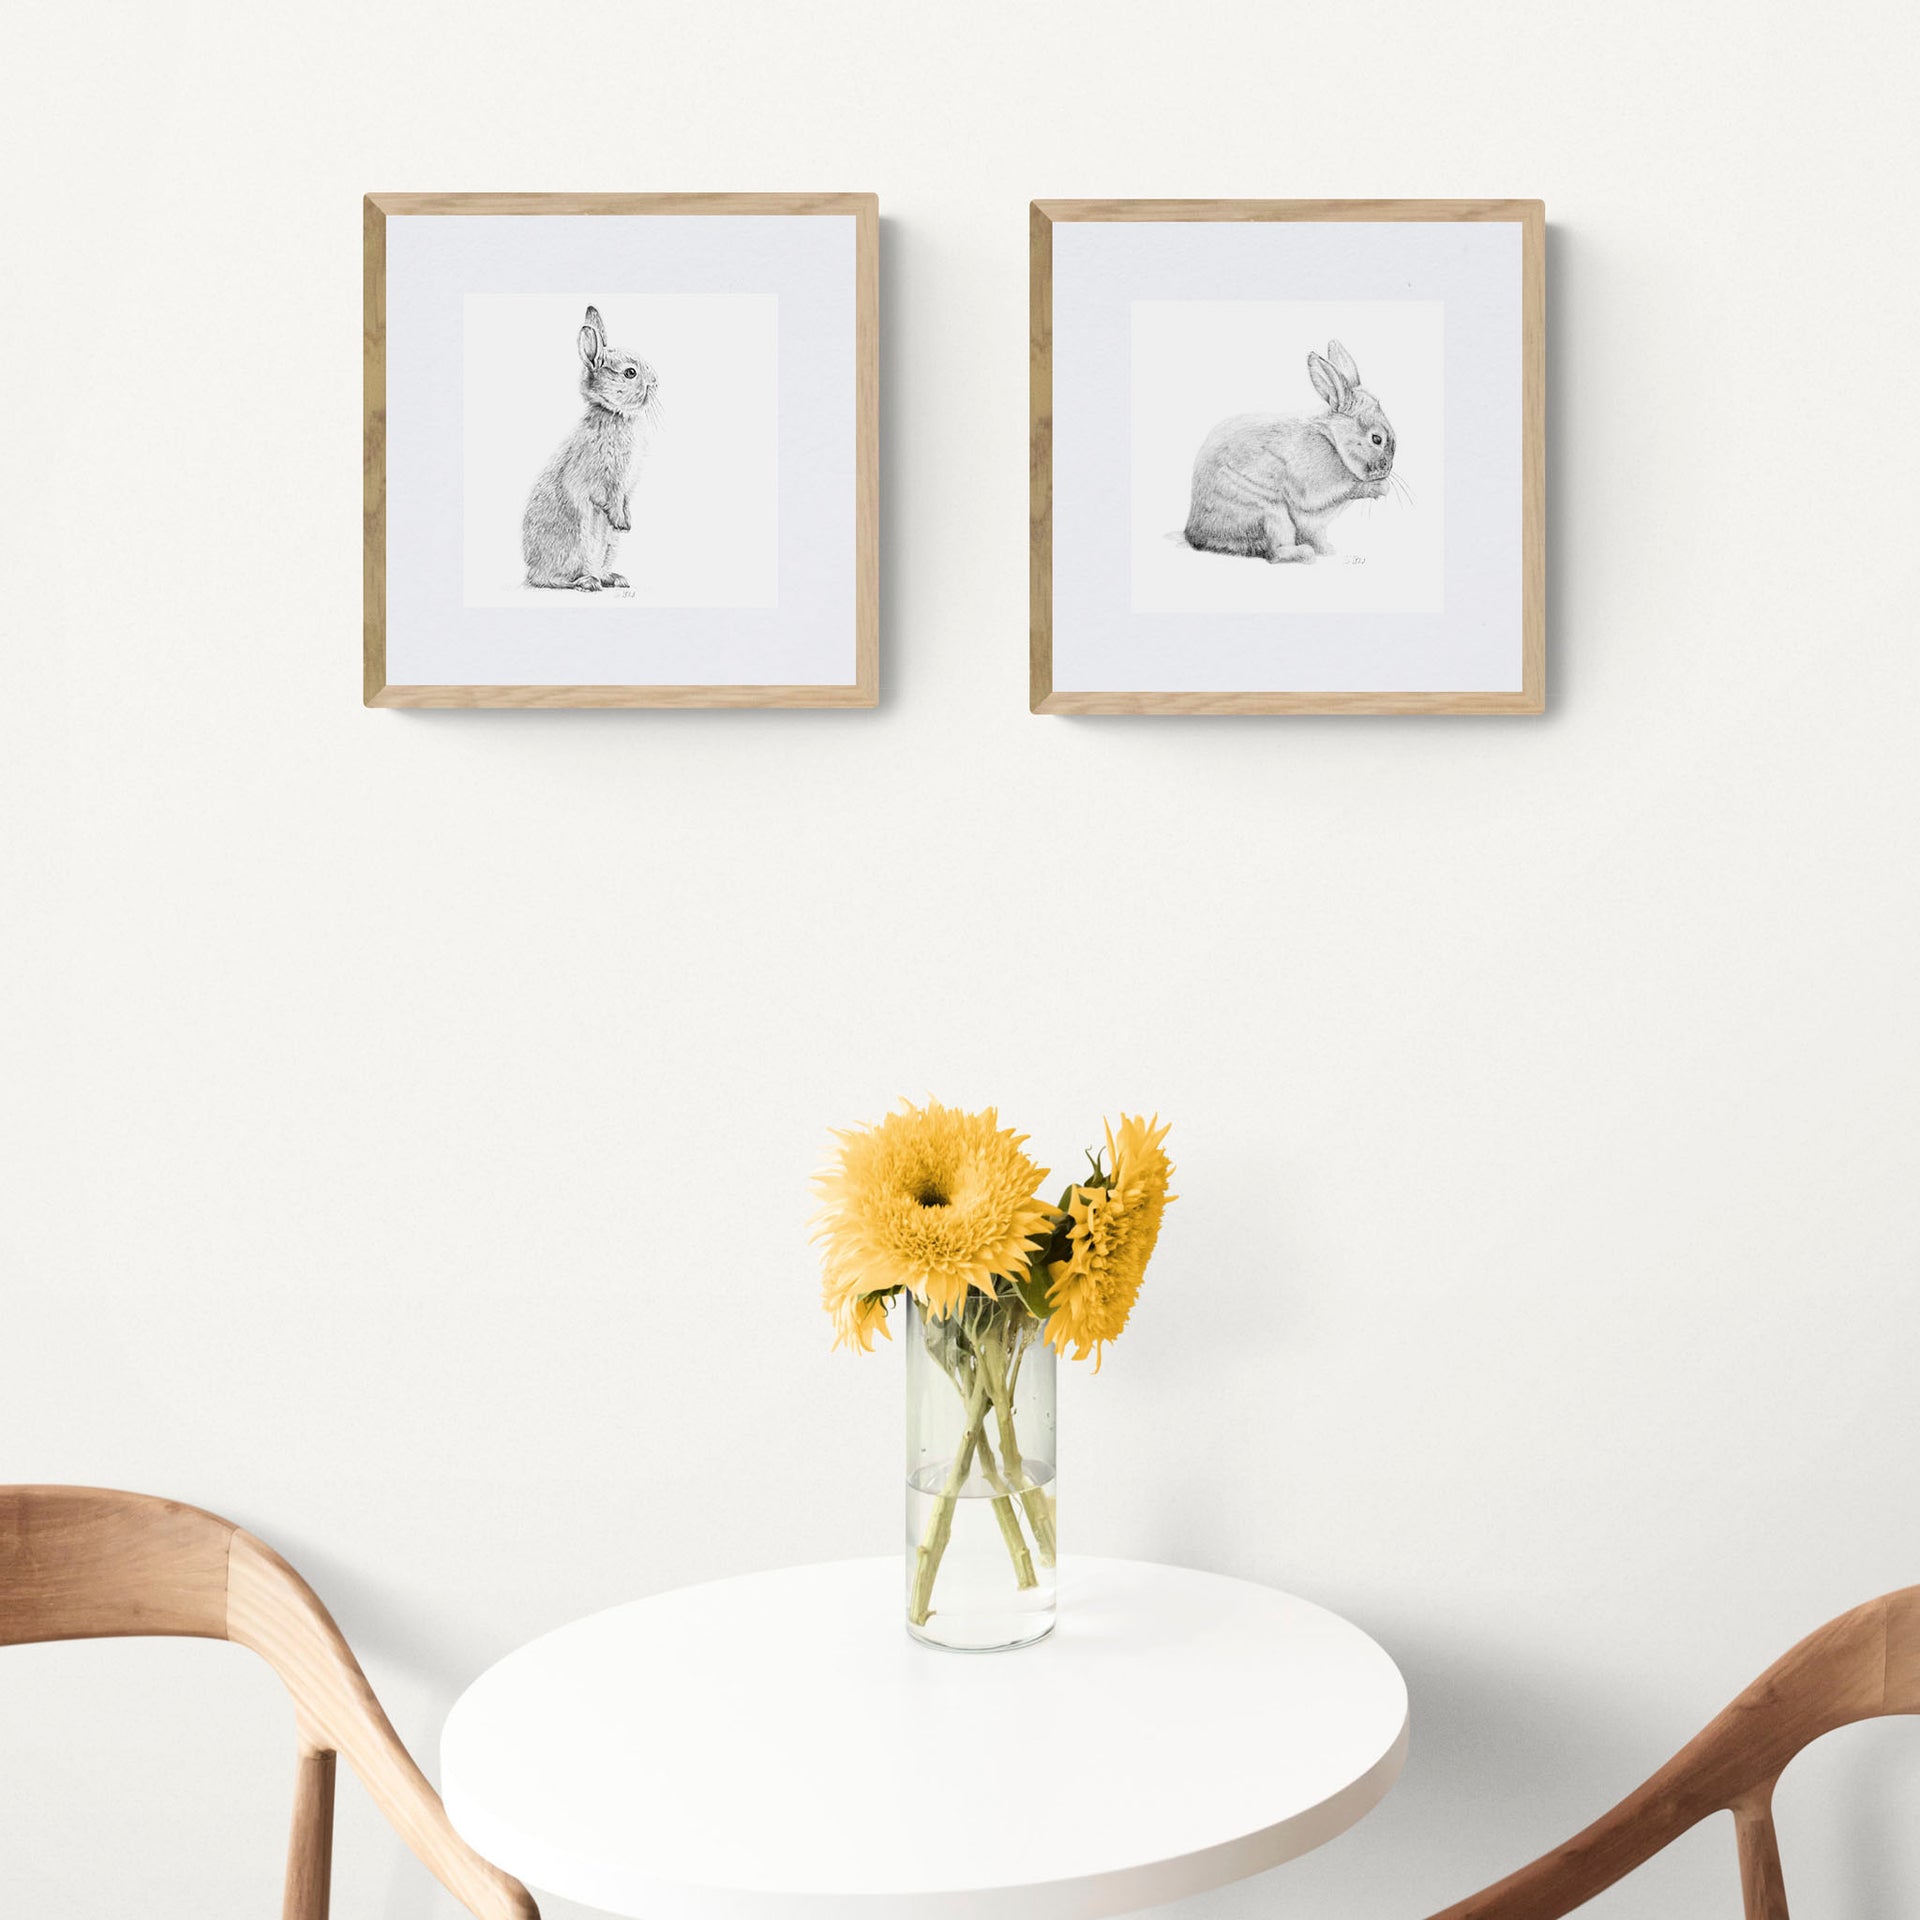 Two rabbit pencil drawing prints on wall